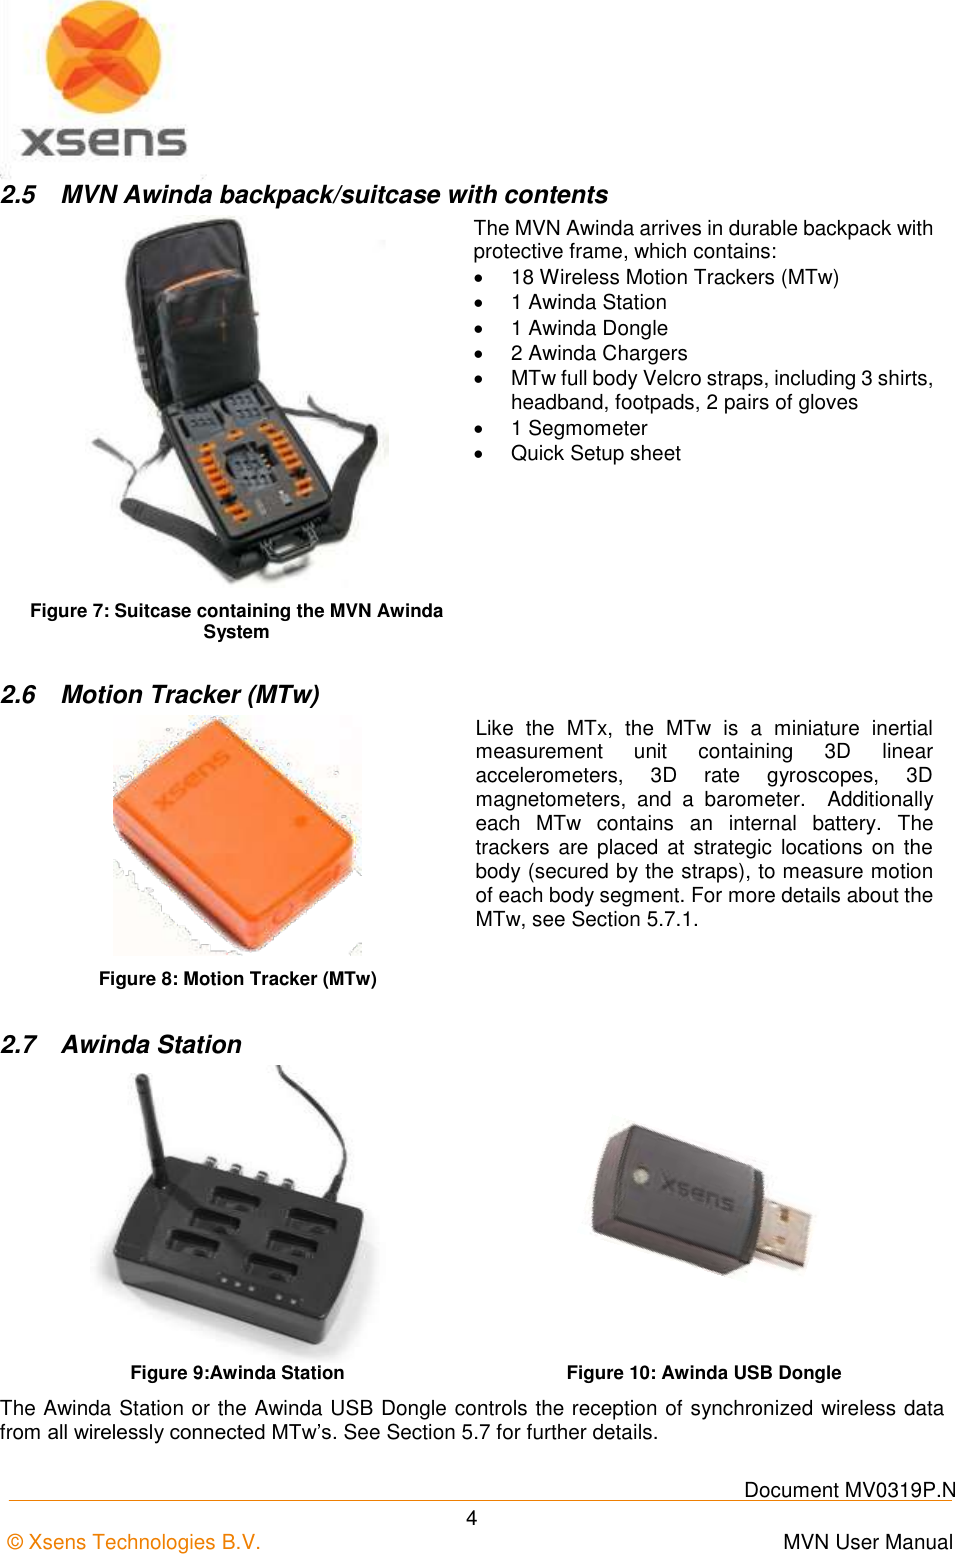    Document MV0319P.N © Xsens Technologies B.V.      MVN User Manual  4 2.5  MVN Awinda backpack/suitcase with contents  Figure 7: Suitcase containing the MVN Awinda System The MVN Awinda arrives in durable backpack with protective frame, which contains:  18 Wireless Motion Trackers (MTw)   1 Awinda Station   1 Awinda Dongle   2 Awinda Chargers   MTw full body Velcro straps, including 3 shirts, headband, footpads, 2 pairs of gloves   1 Segmometer   Quick Setup sheet  2.6  Motion Tracker (MTw)  Like  the  MTx,  the  MTw  is  a  miniature  inertial measurement  unit  containing  3D  linear accelerometers,  3D  rate  gyroscopes,  3D magnetometers,  and  a  barometer.    Additionally each  MTw  contains  an  internal  battery.  The trackers  are placed  at  strategic  locations  on  the body (secured by the straps), to measure motion of each body segment. For more details about the MTw, see Section 5.7.1. Figure 8: Motion Tracker (MTw)  2.7  Awinda Station   Figure 9:Awinda Station Figure 10: Awinda USB Dongle The Awinda Station or the Awinda USB Dongle controls the reception of synchronized wireless data from all wirelessly connected MTw’s. See Section 5.7 for further details. 